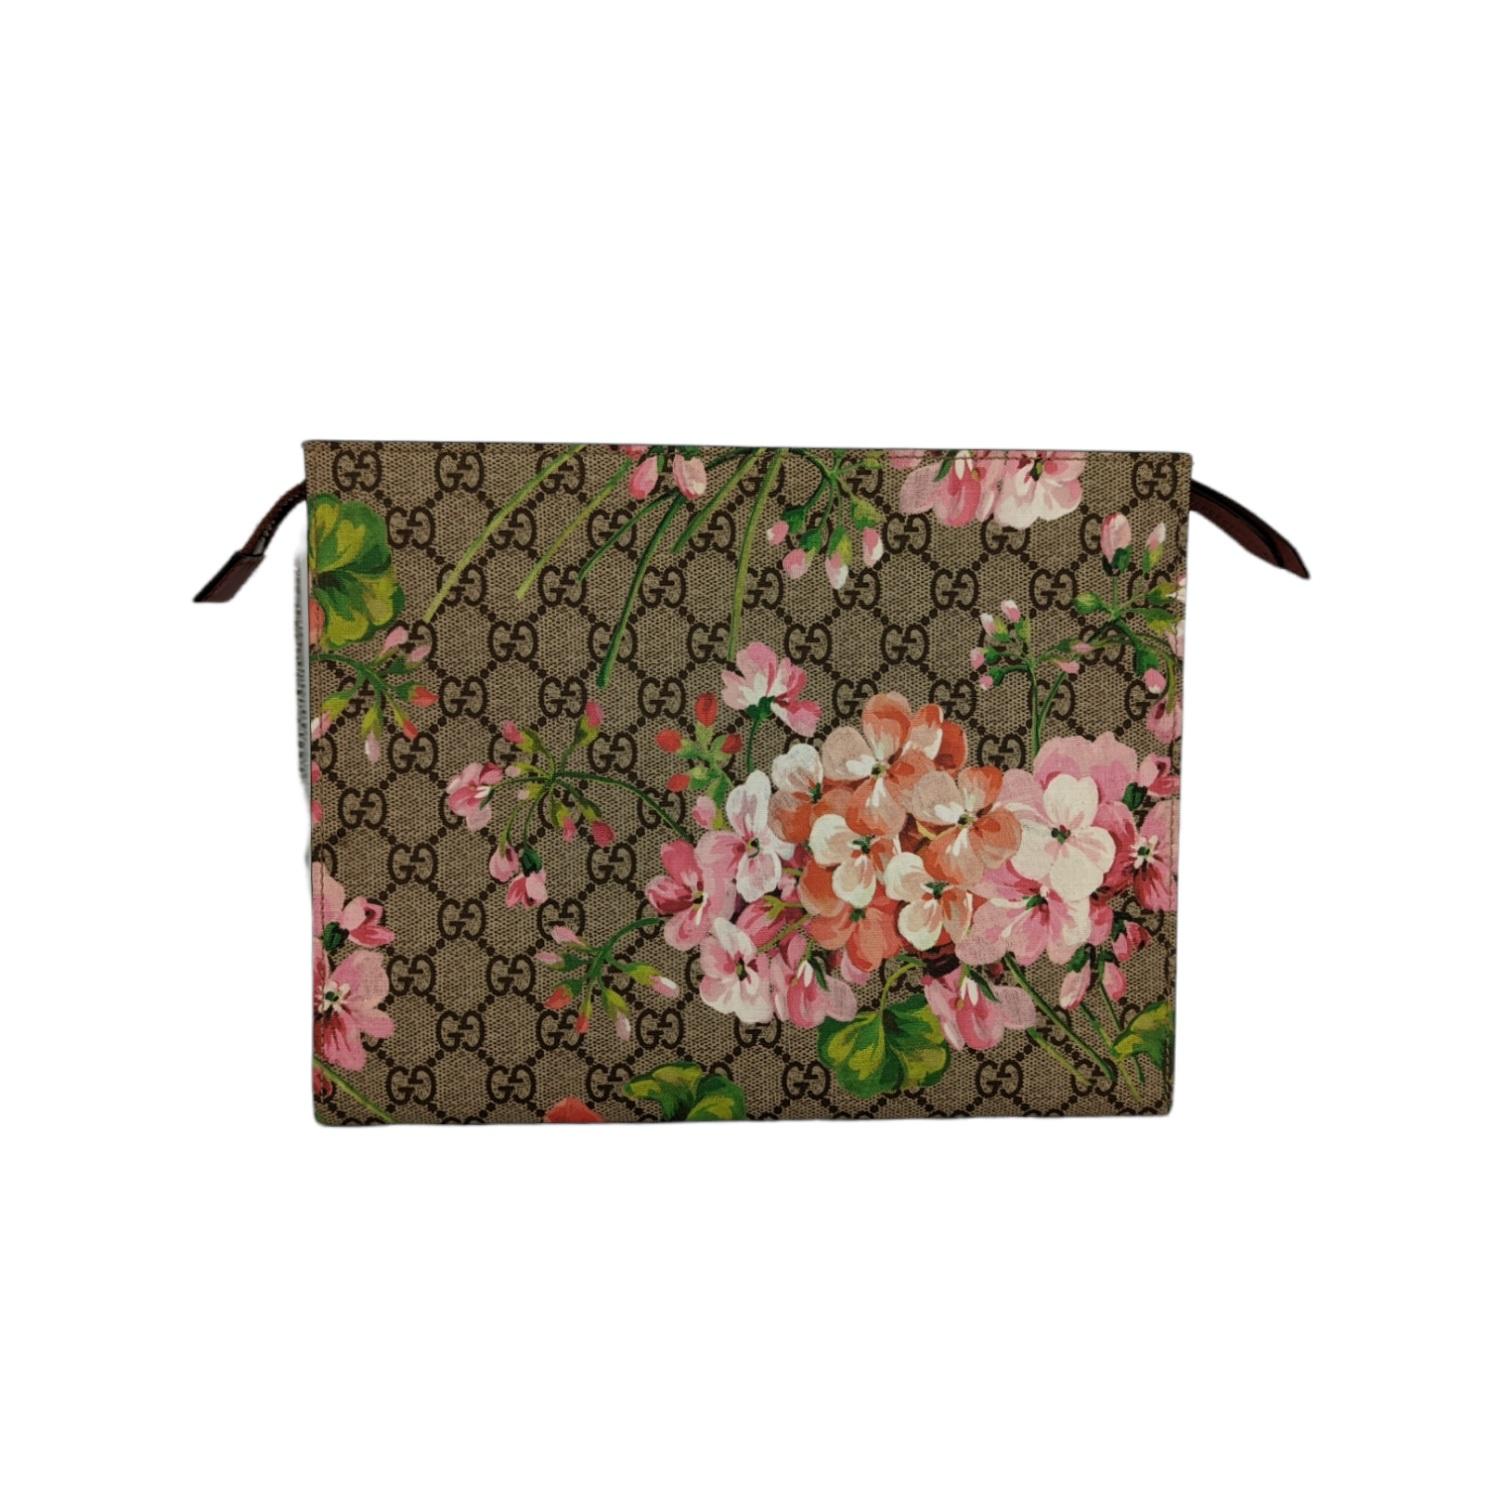 Gucci Bloom Pouch - 2 For Sale on 1stDibs | gucci toiletry bag floral, gucci  bloom pochette, gucci bloom pouch pink